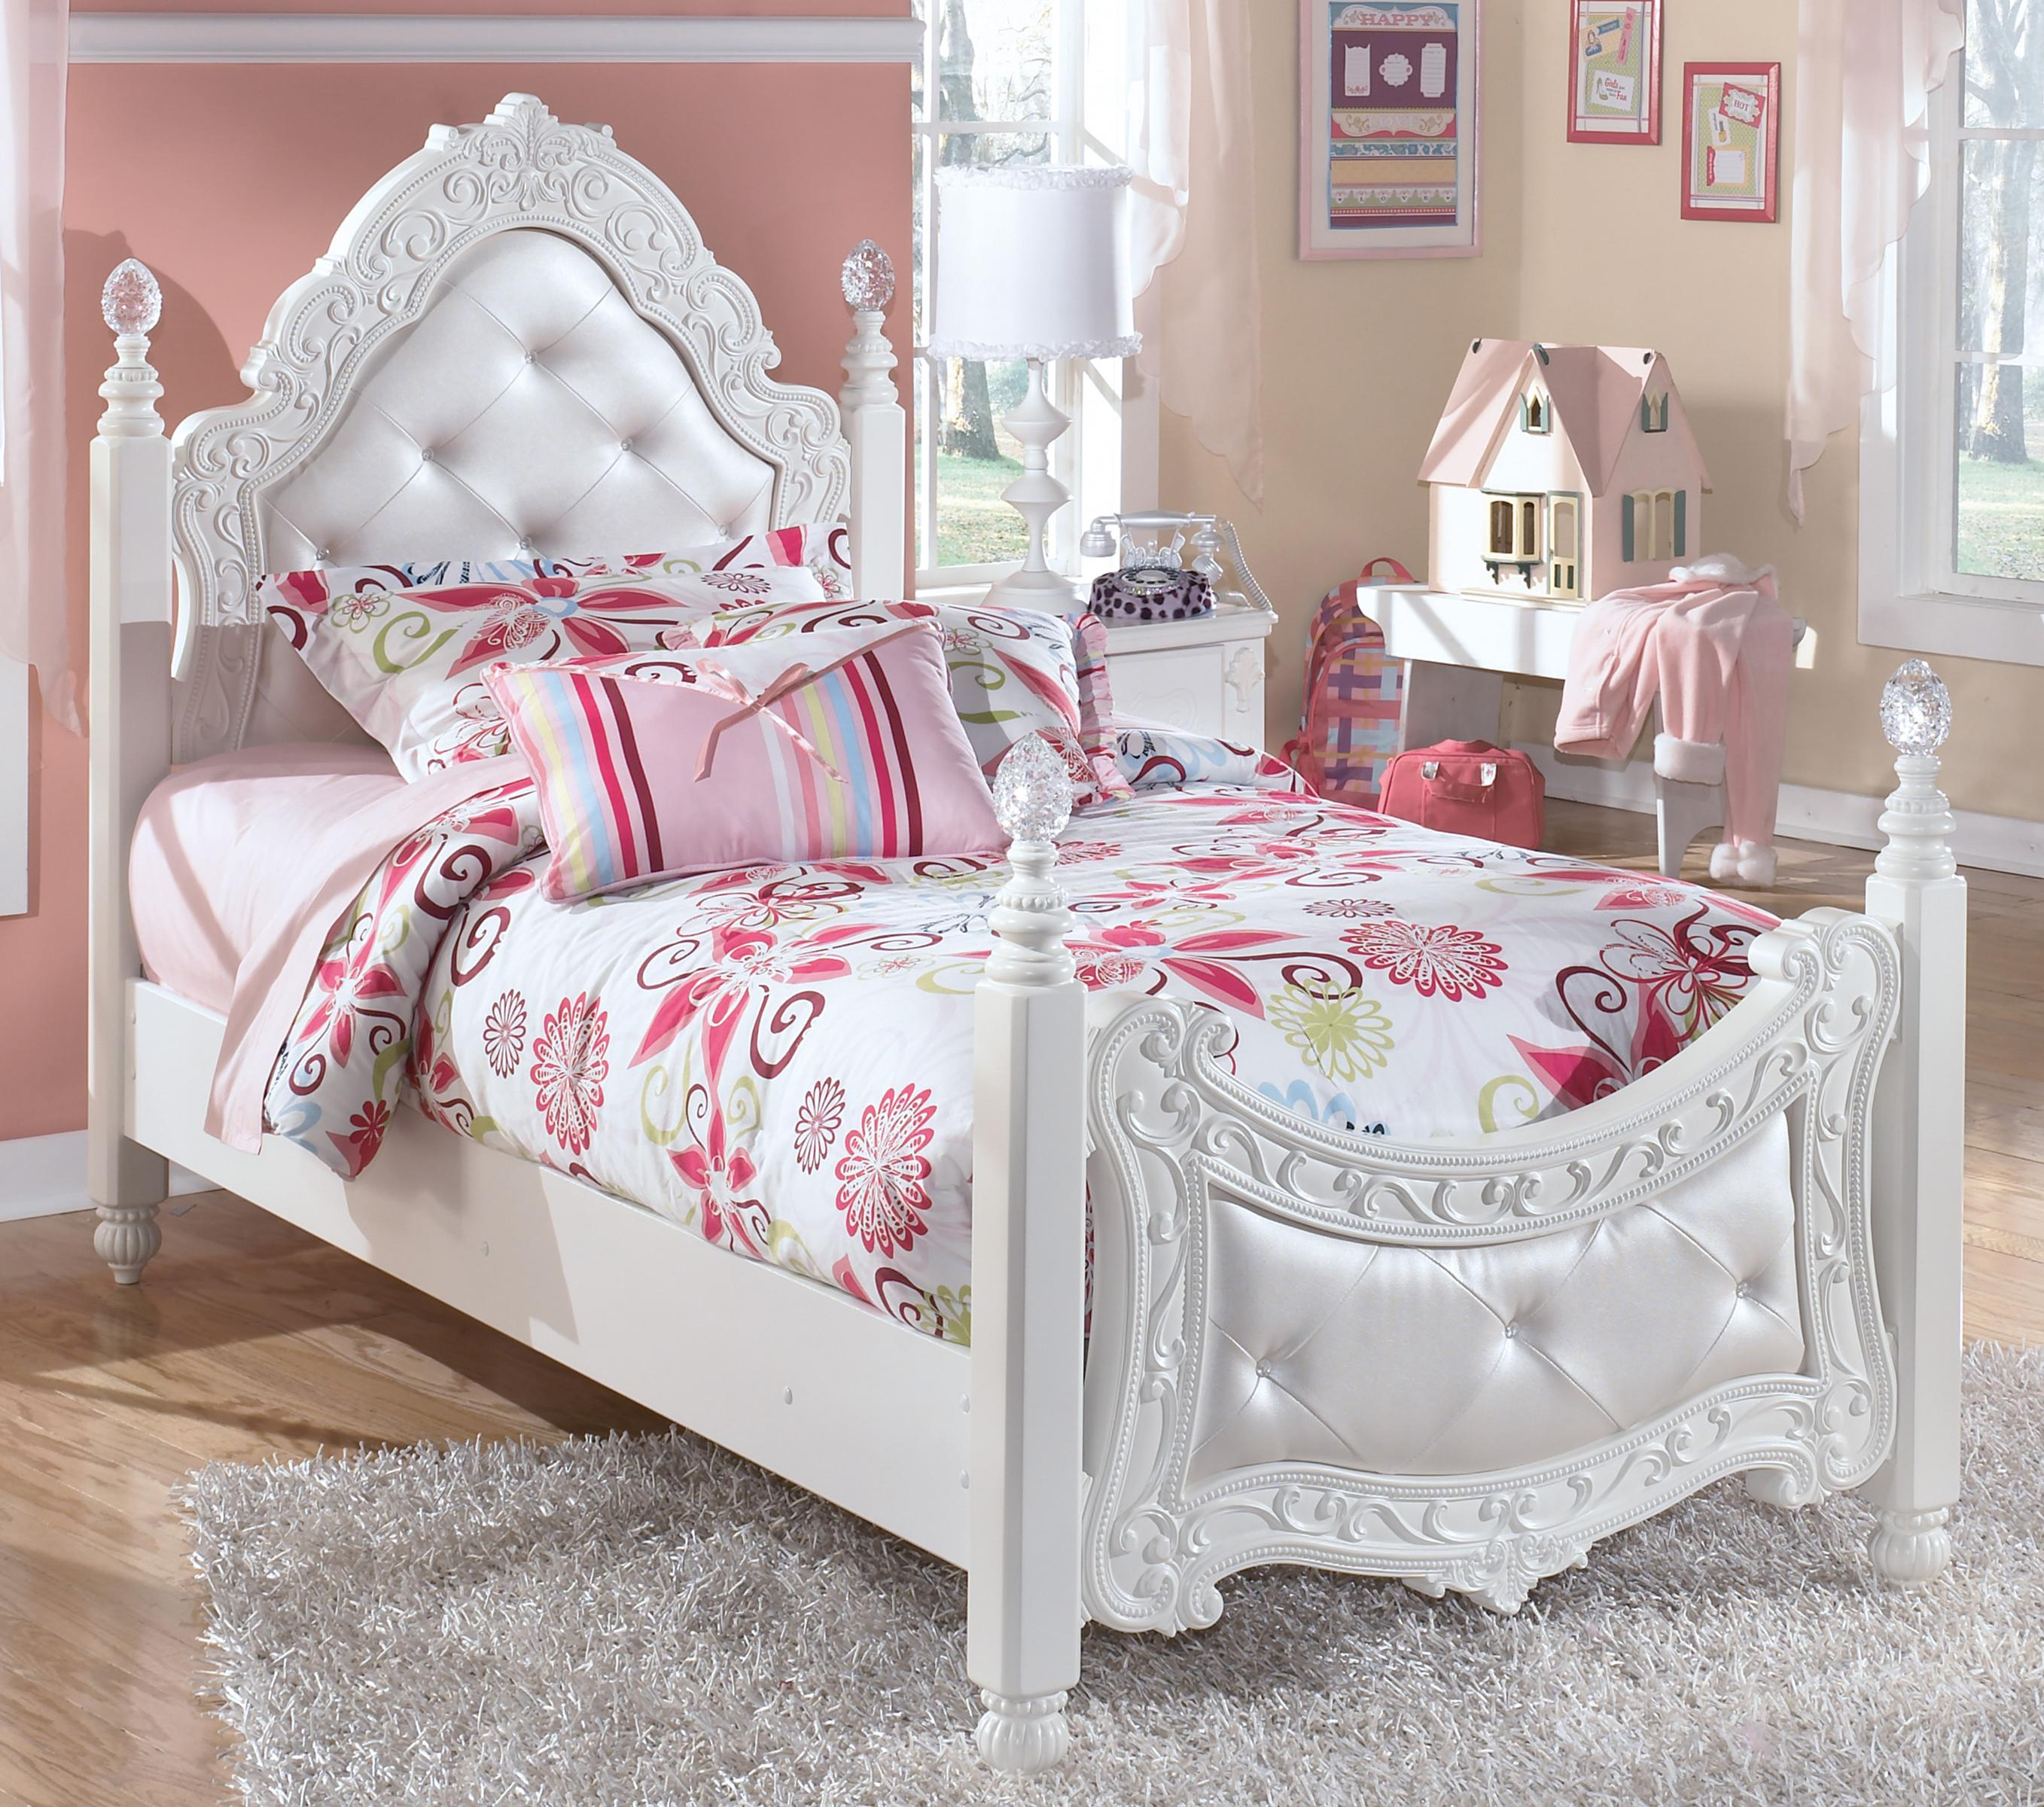 Twin Ornate Poster Bed With Tufted Headboard Footboard throughout dimensions 2715 X 2400